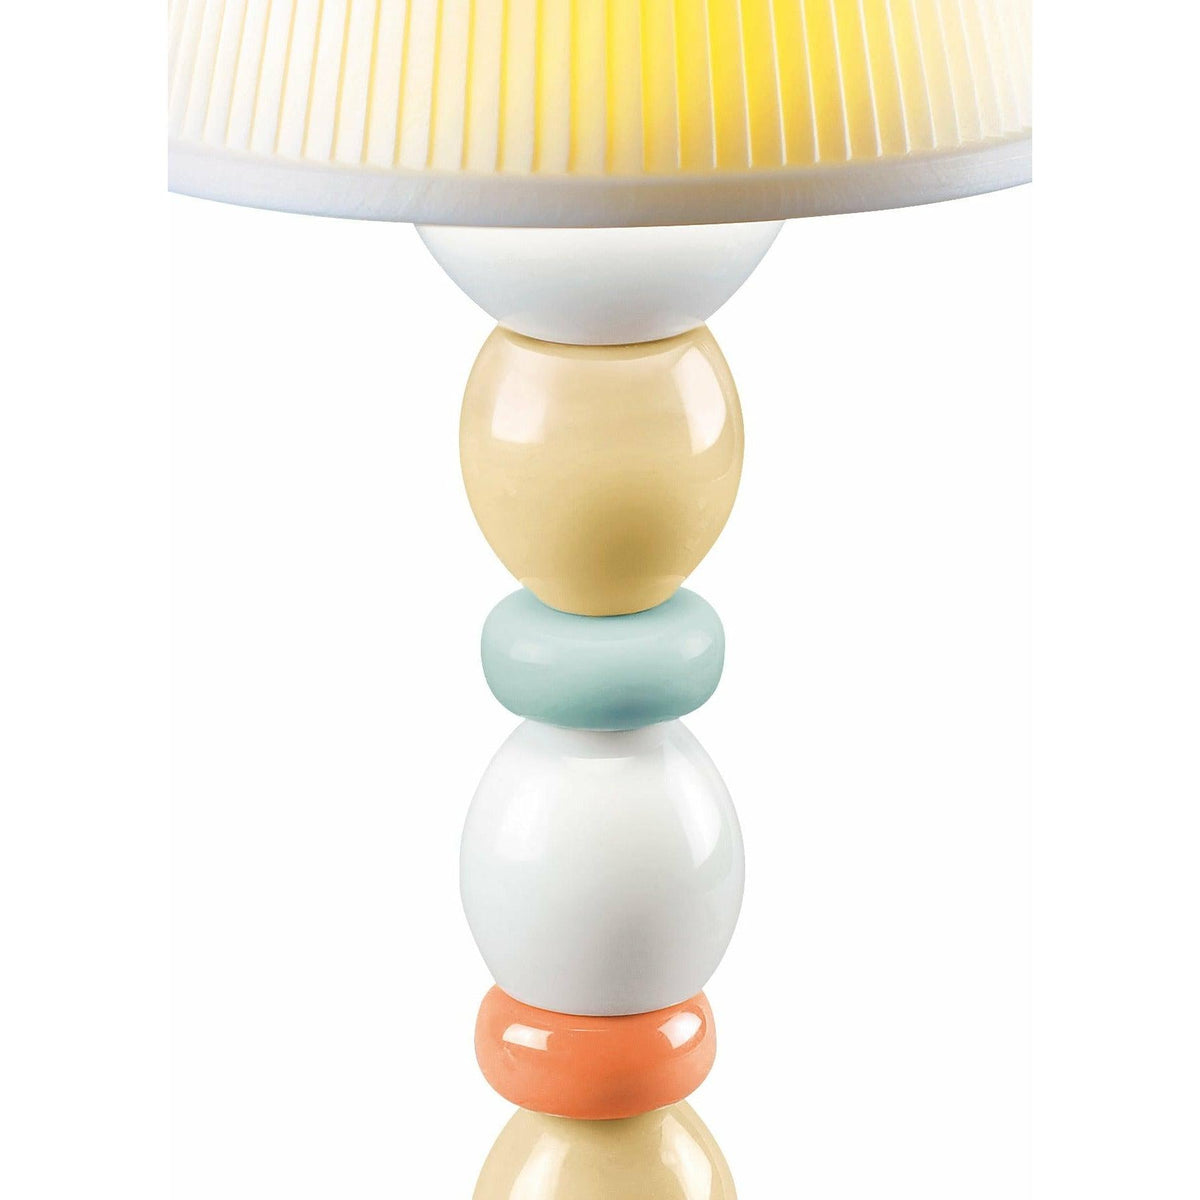 Lladro - Palm Firefly Table Lamp - 01023762 | Montreal Lighting & Hardware